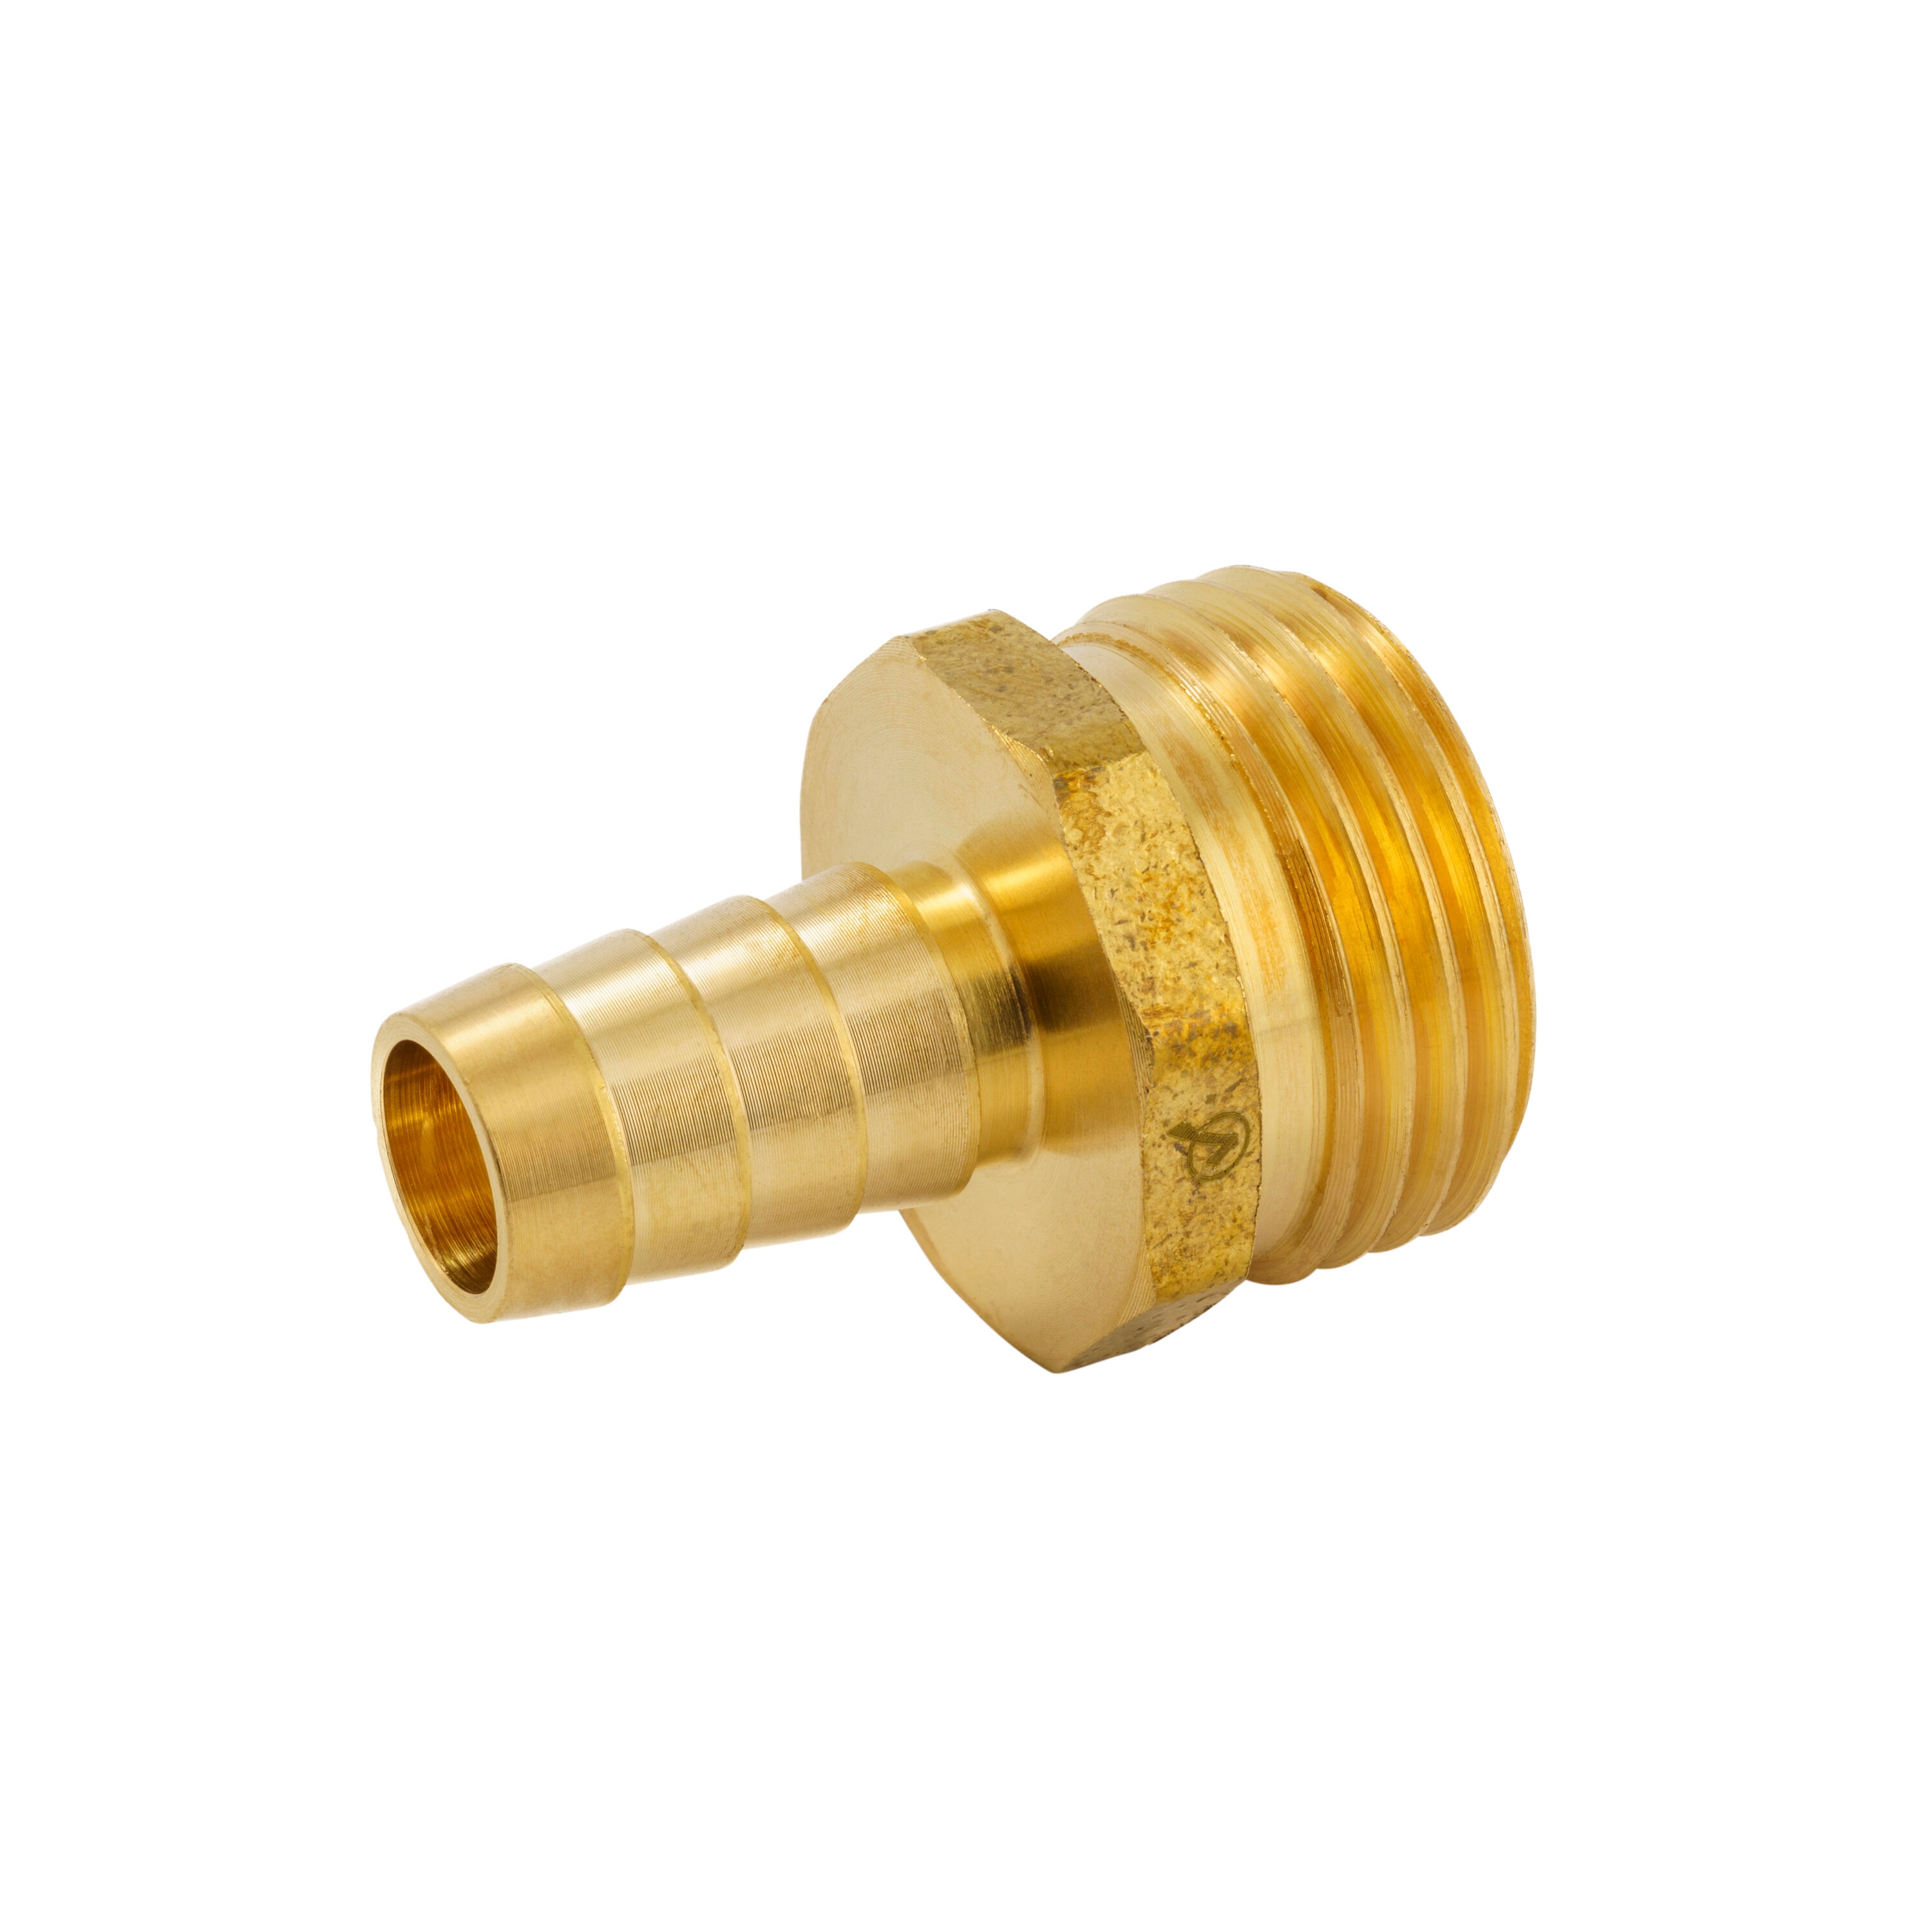 3/8 Brass Hose Barb Nipple X 1/4 Male NPT Threads for CO2, Gas, Air PACK  OF 4